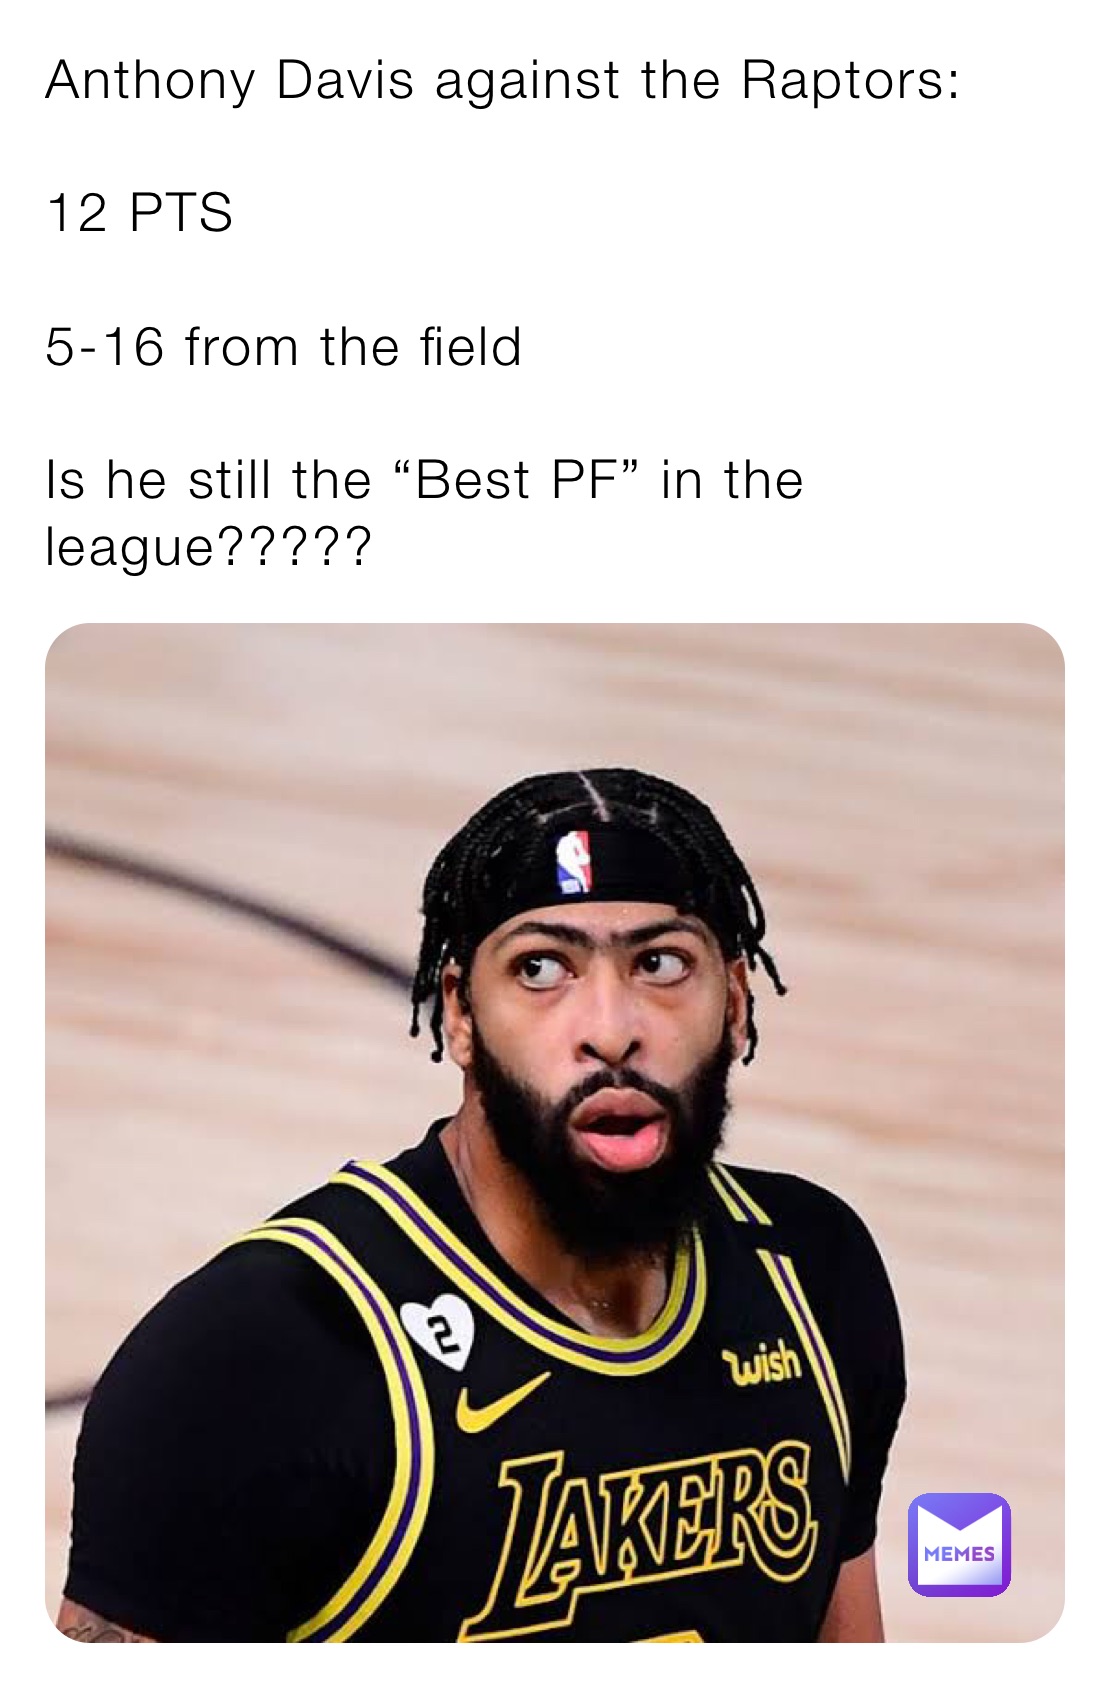 Anthony Davis against the Raptors:

12 PTS

5-16 from the field

Is he still the “Best PF” in the league?????